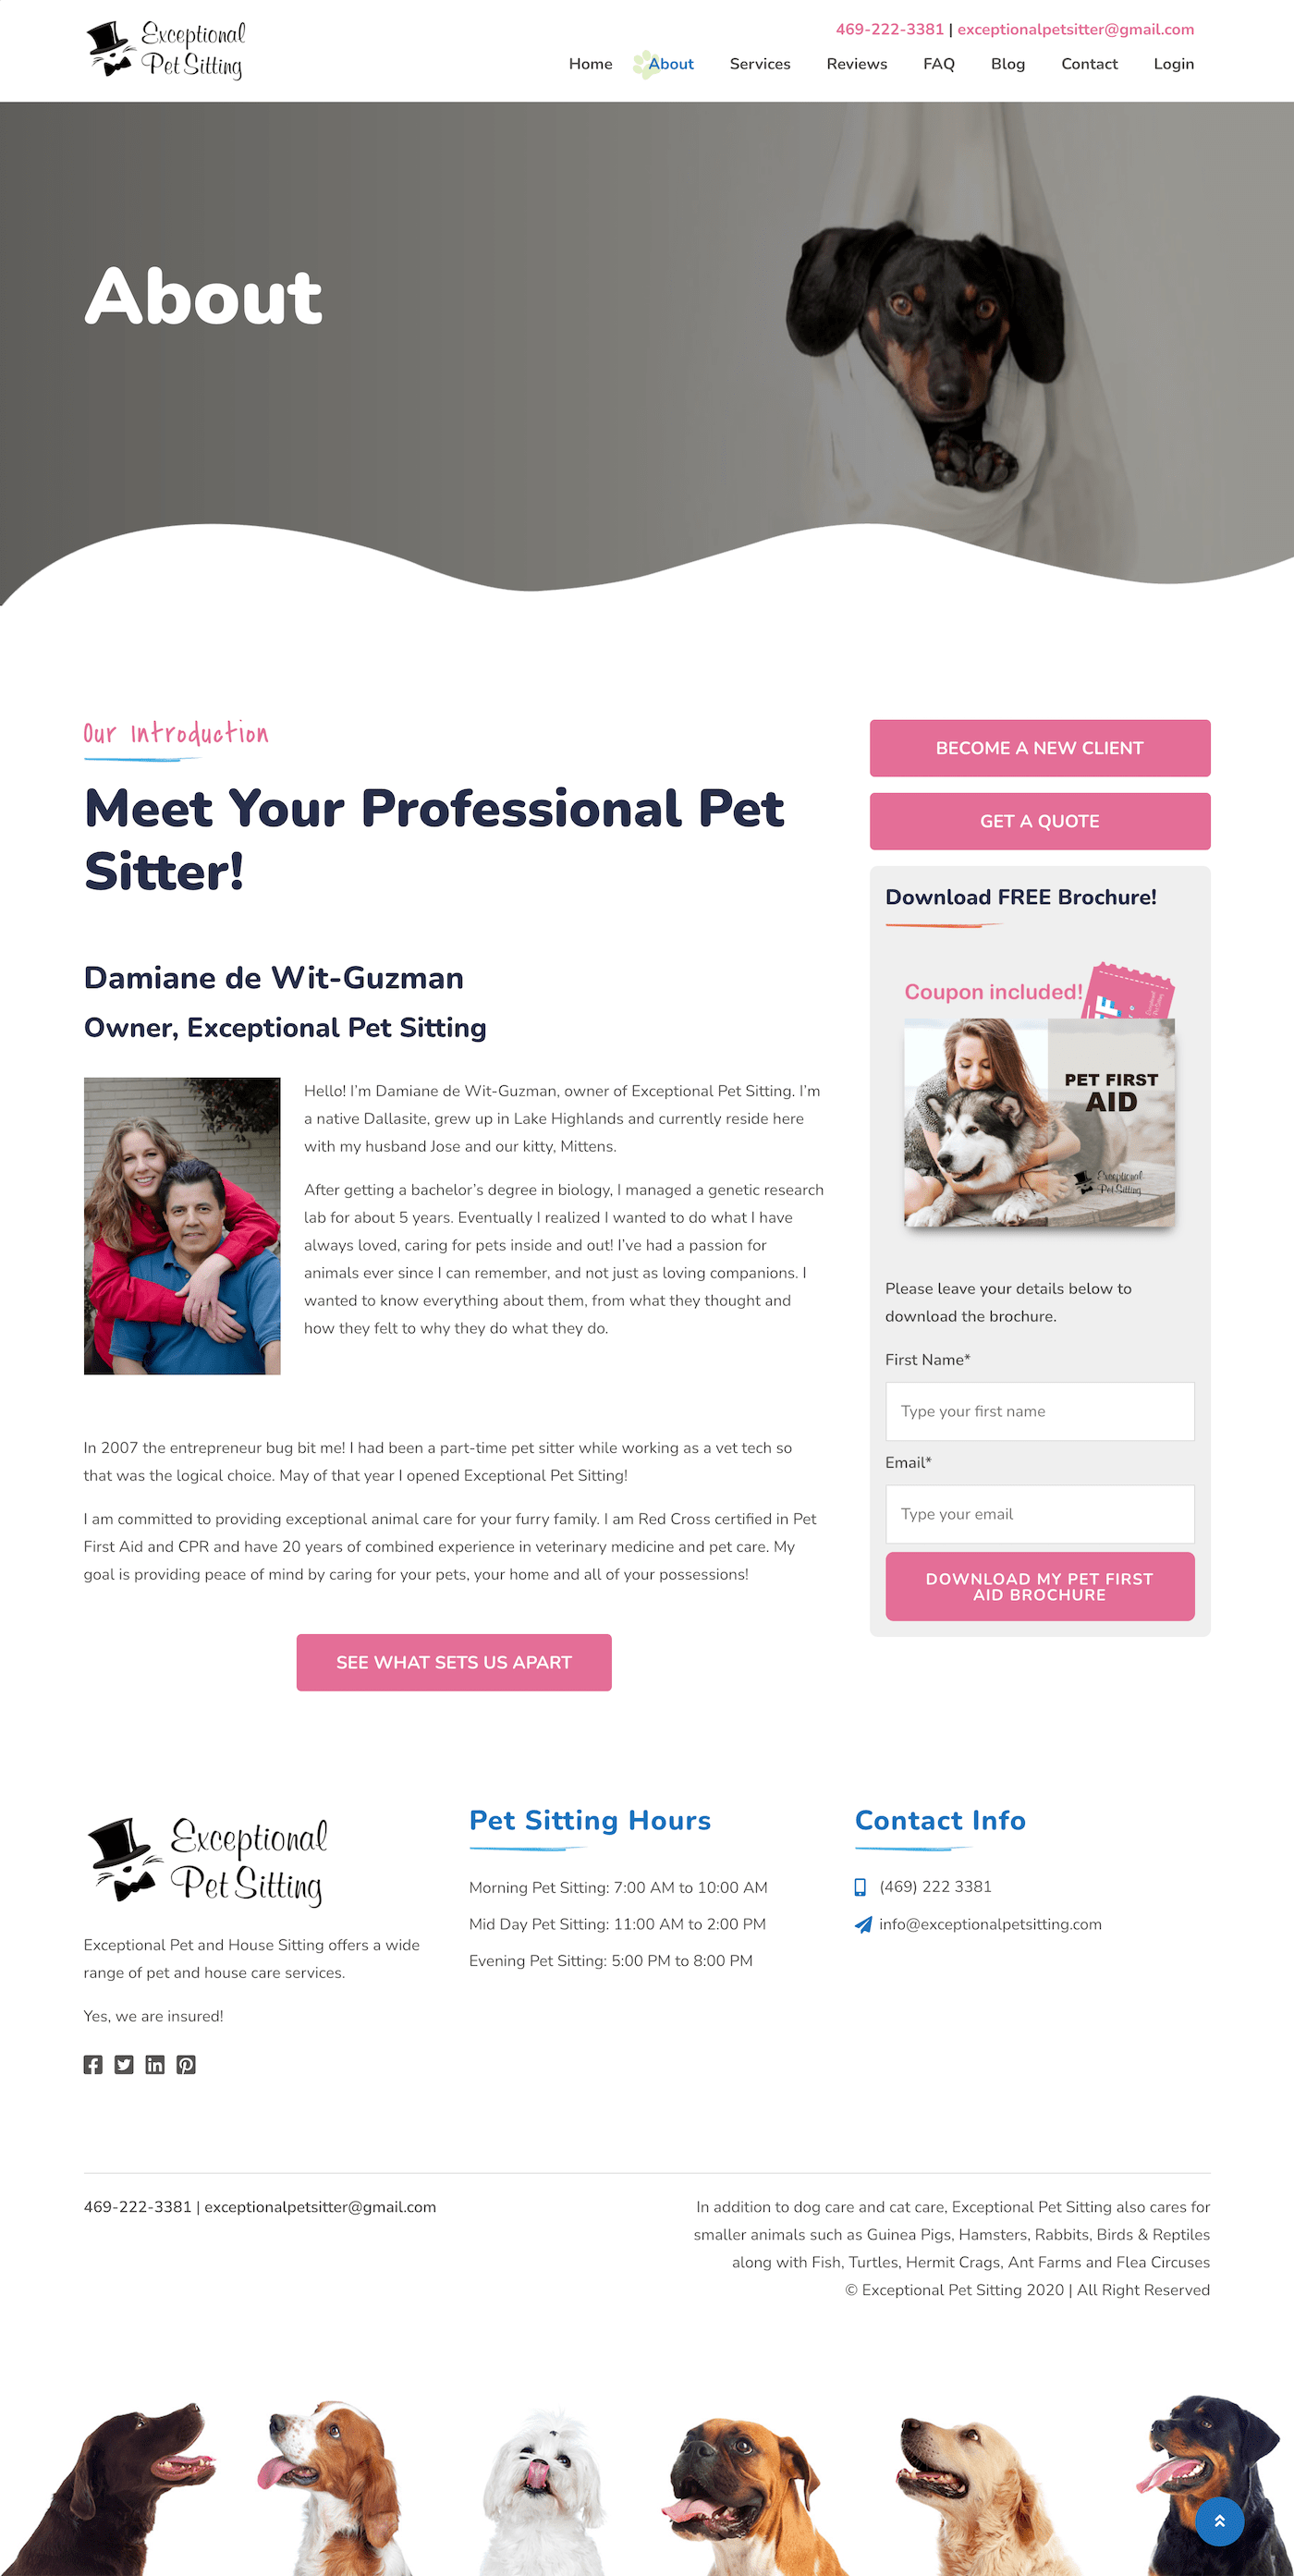 Exceptional Pet Sitting About page